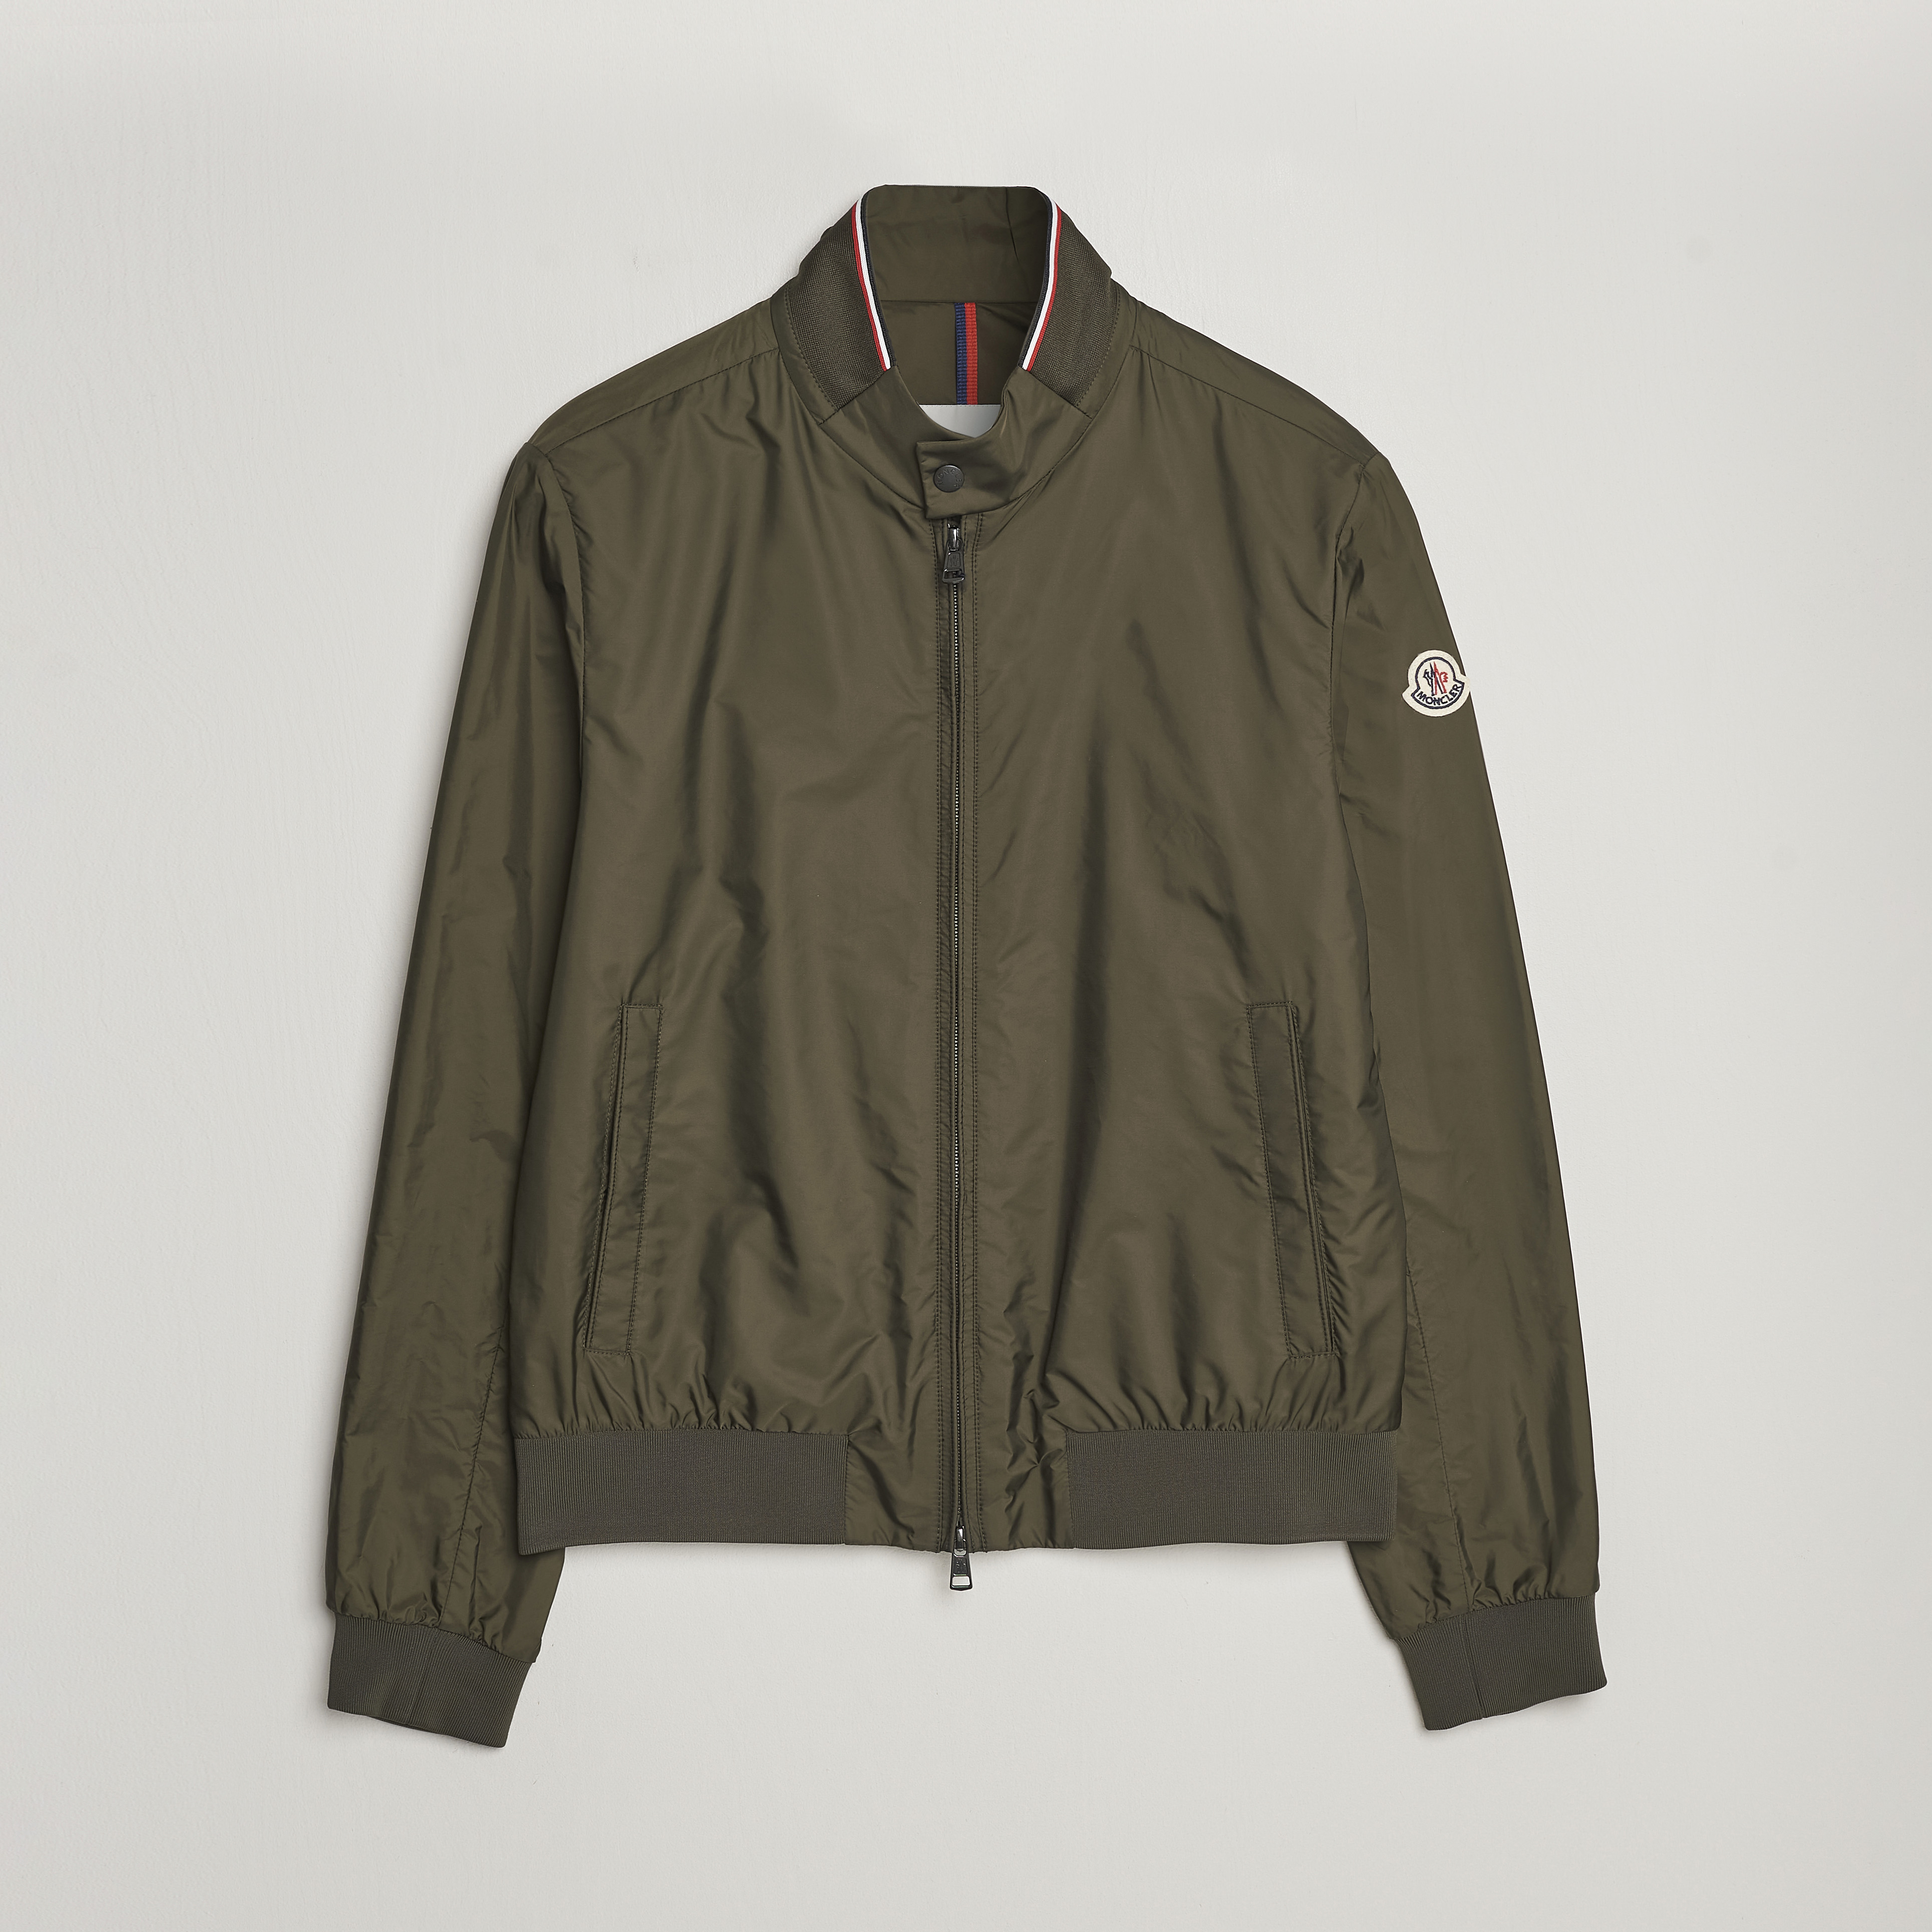 Moncler Reppe Bomber Jacket Military Green at CareOfCarl.com